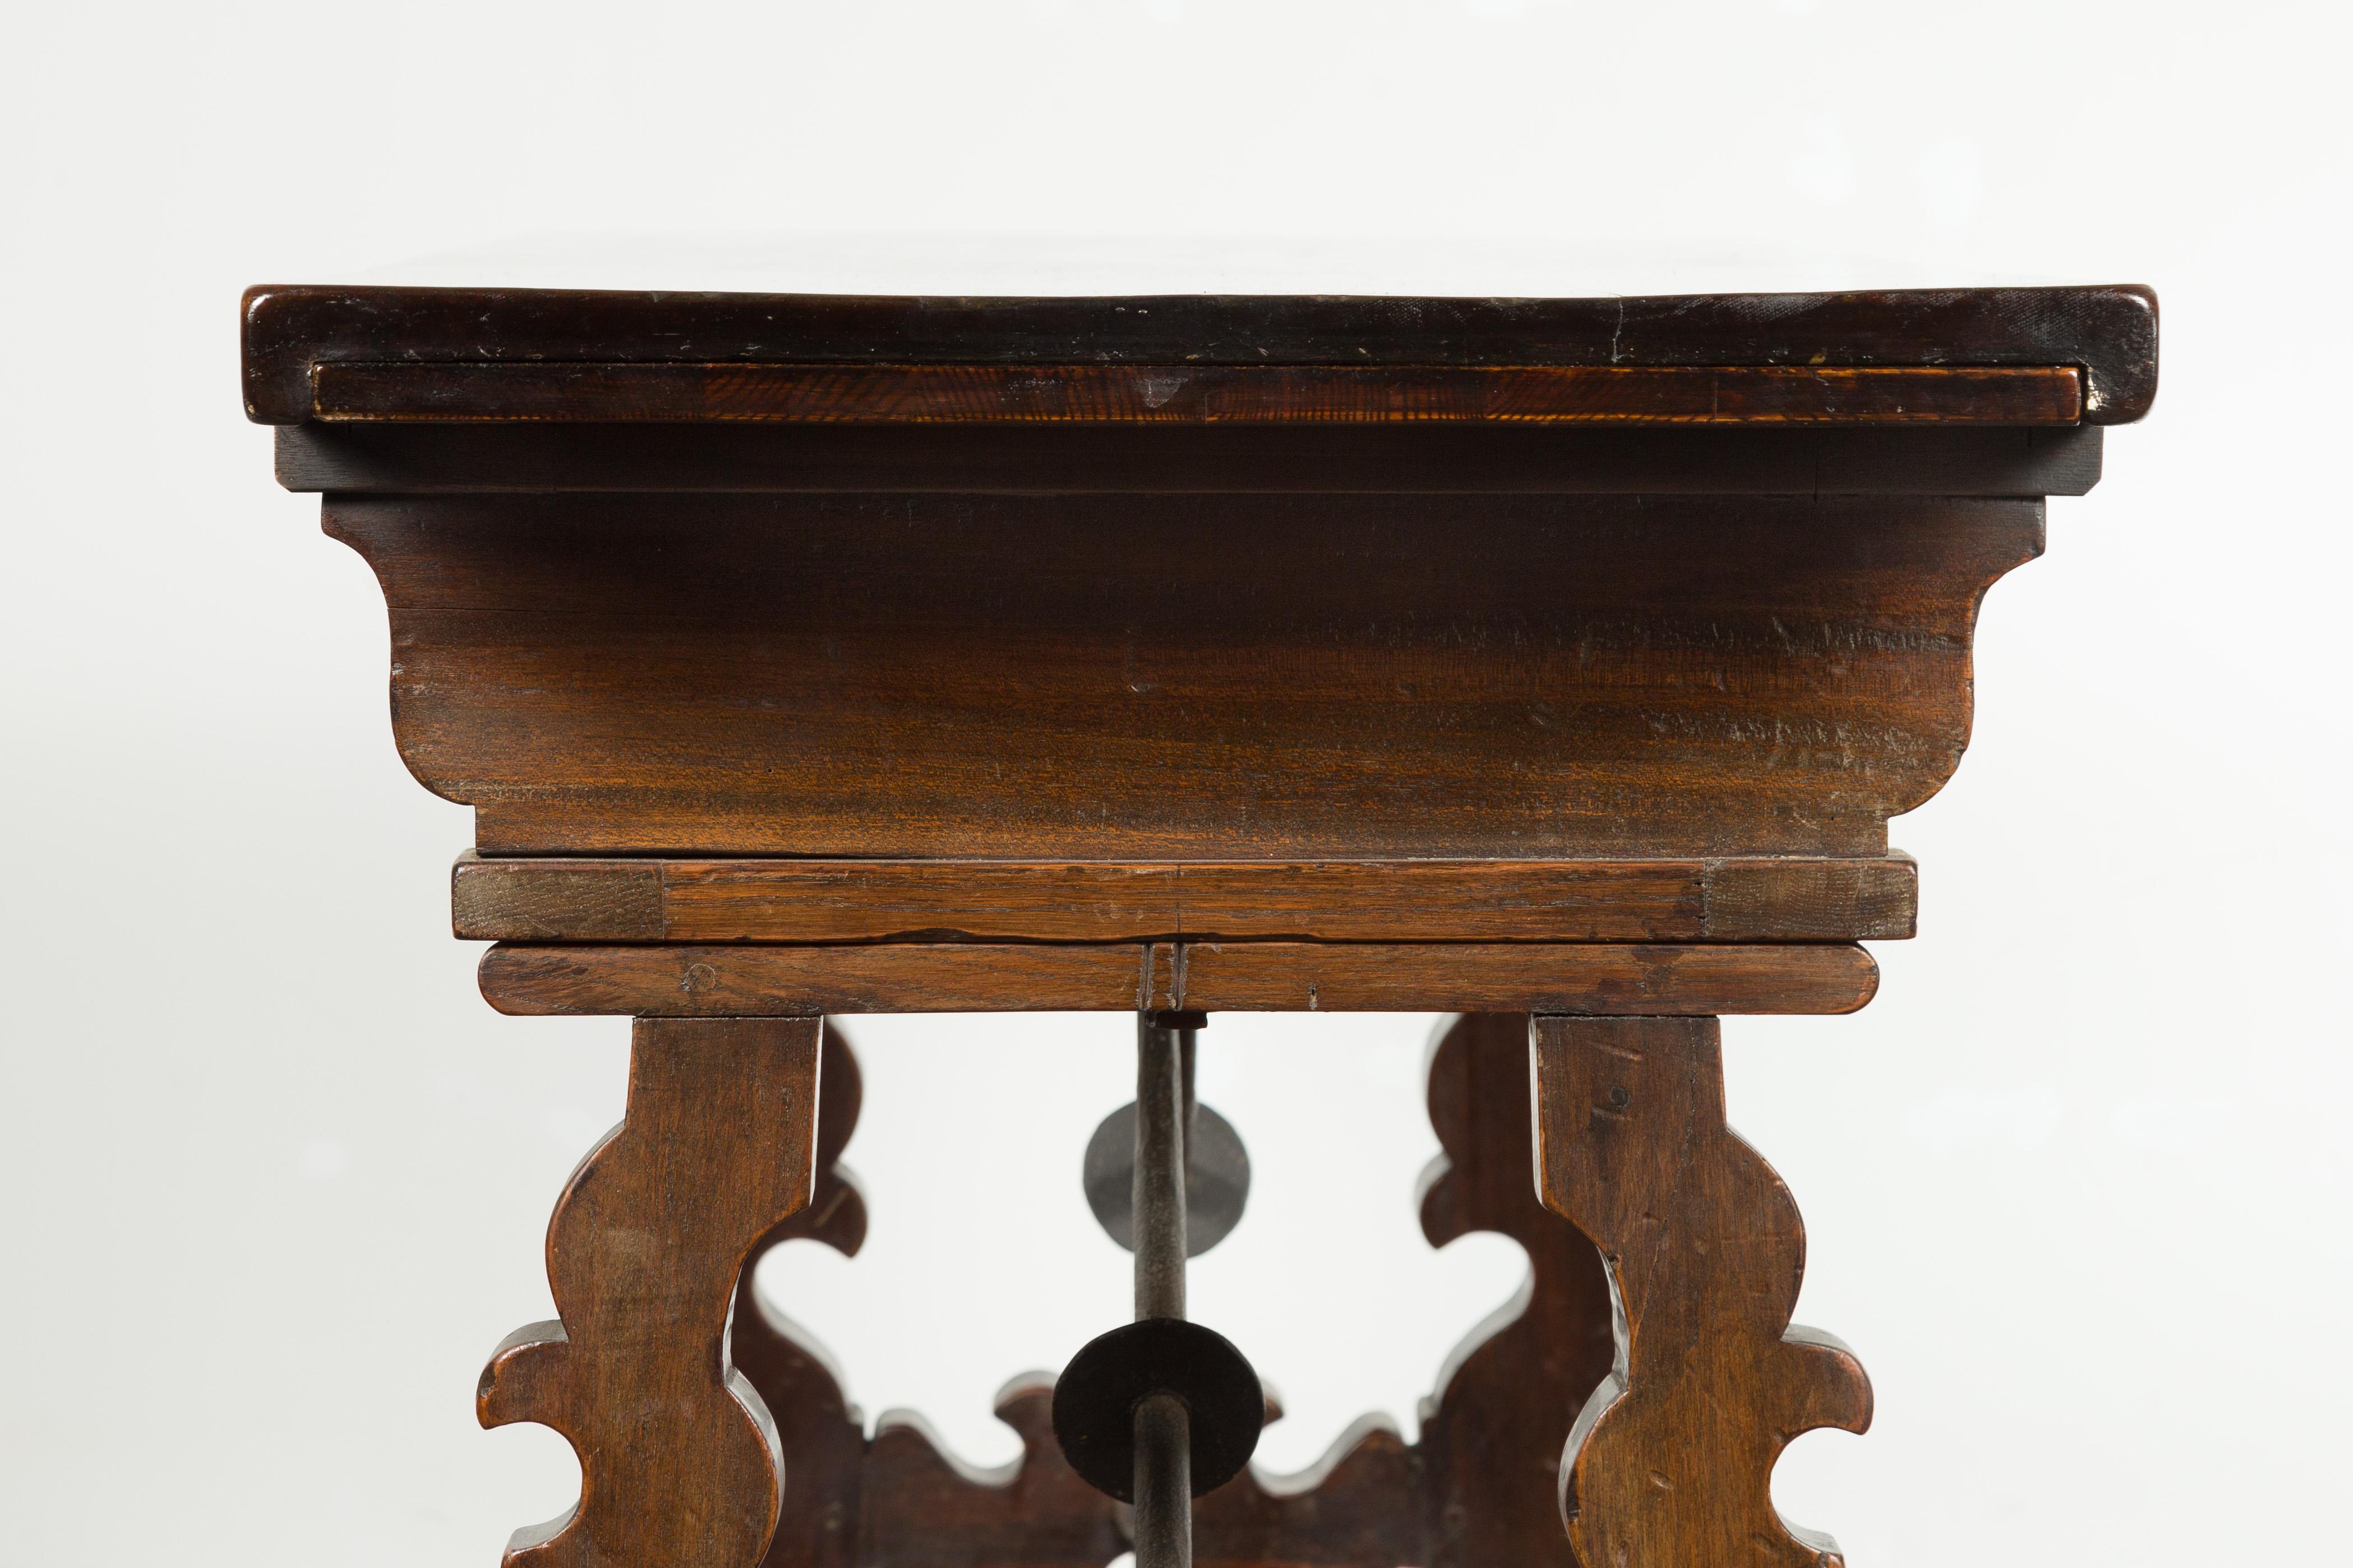 Italian 1820s Walnut Fratino Table with Iron Stretcher and Extension Leaves 13